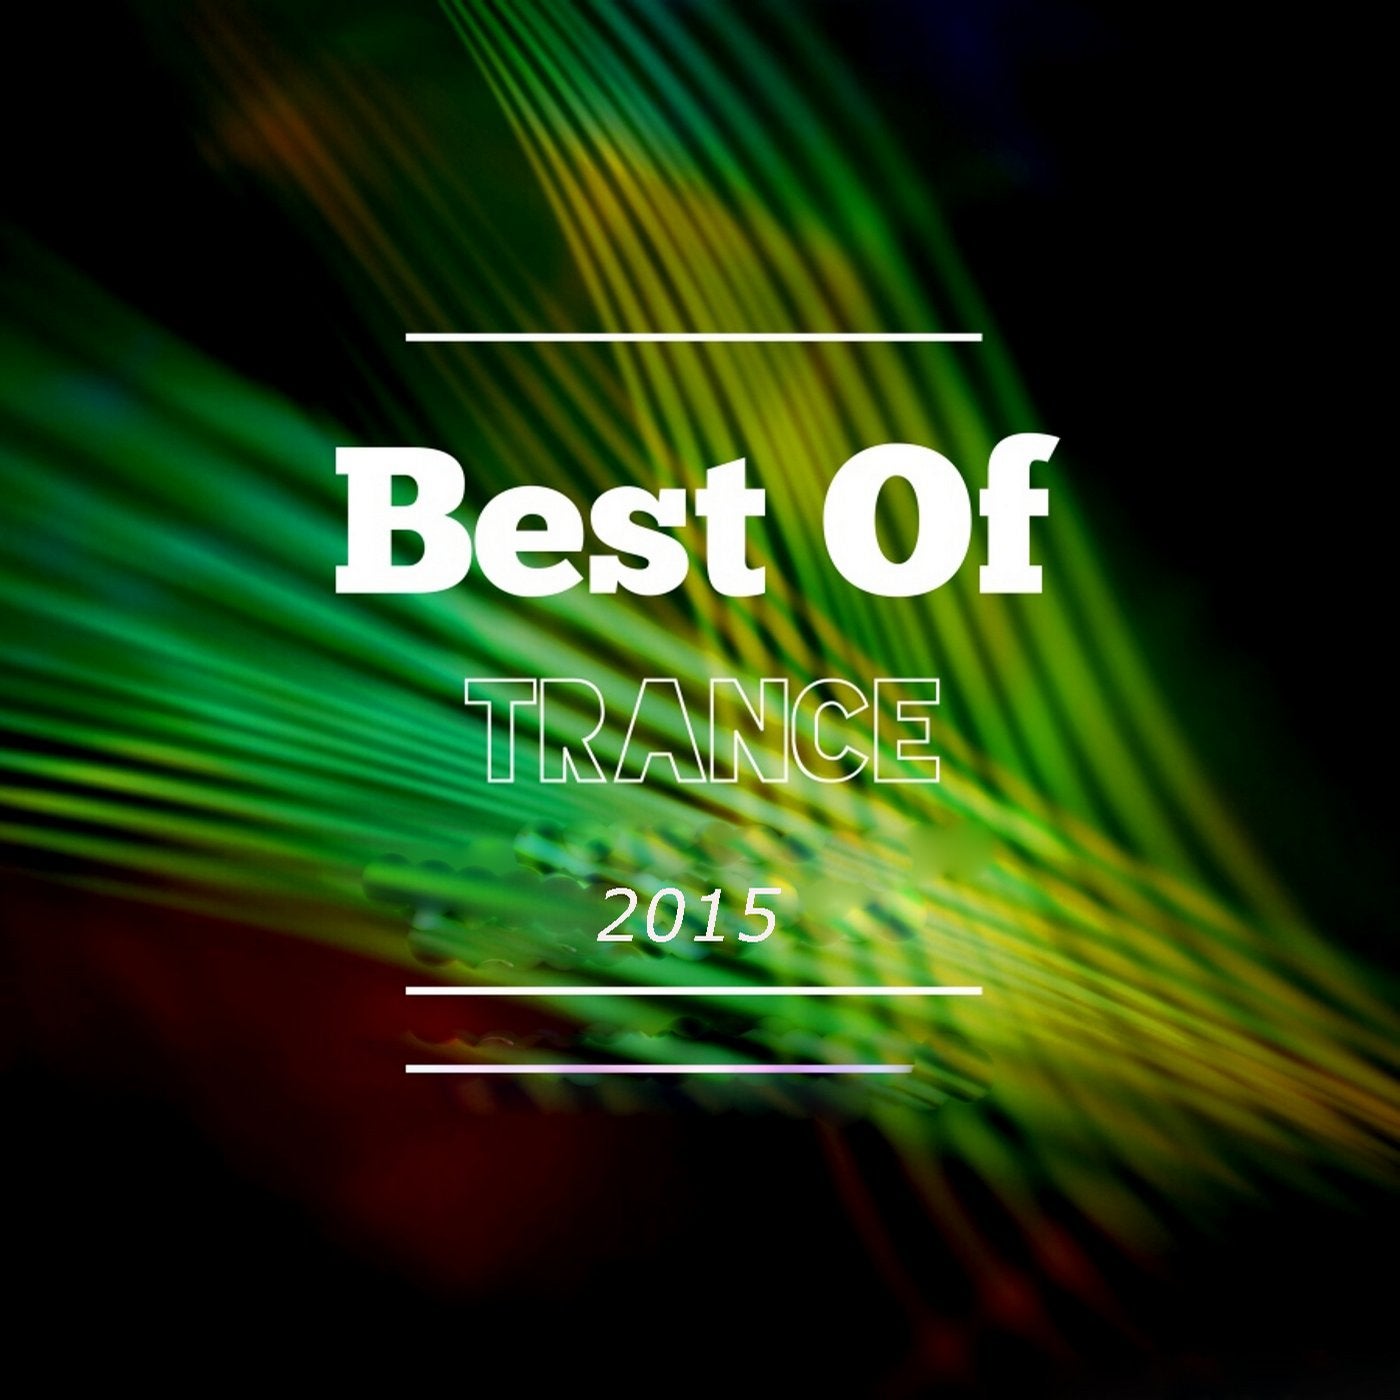 Best Of Trance 2015